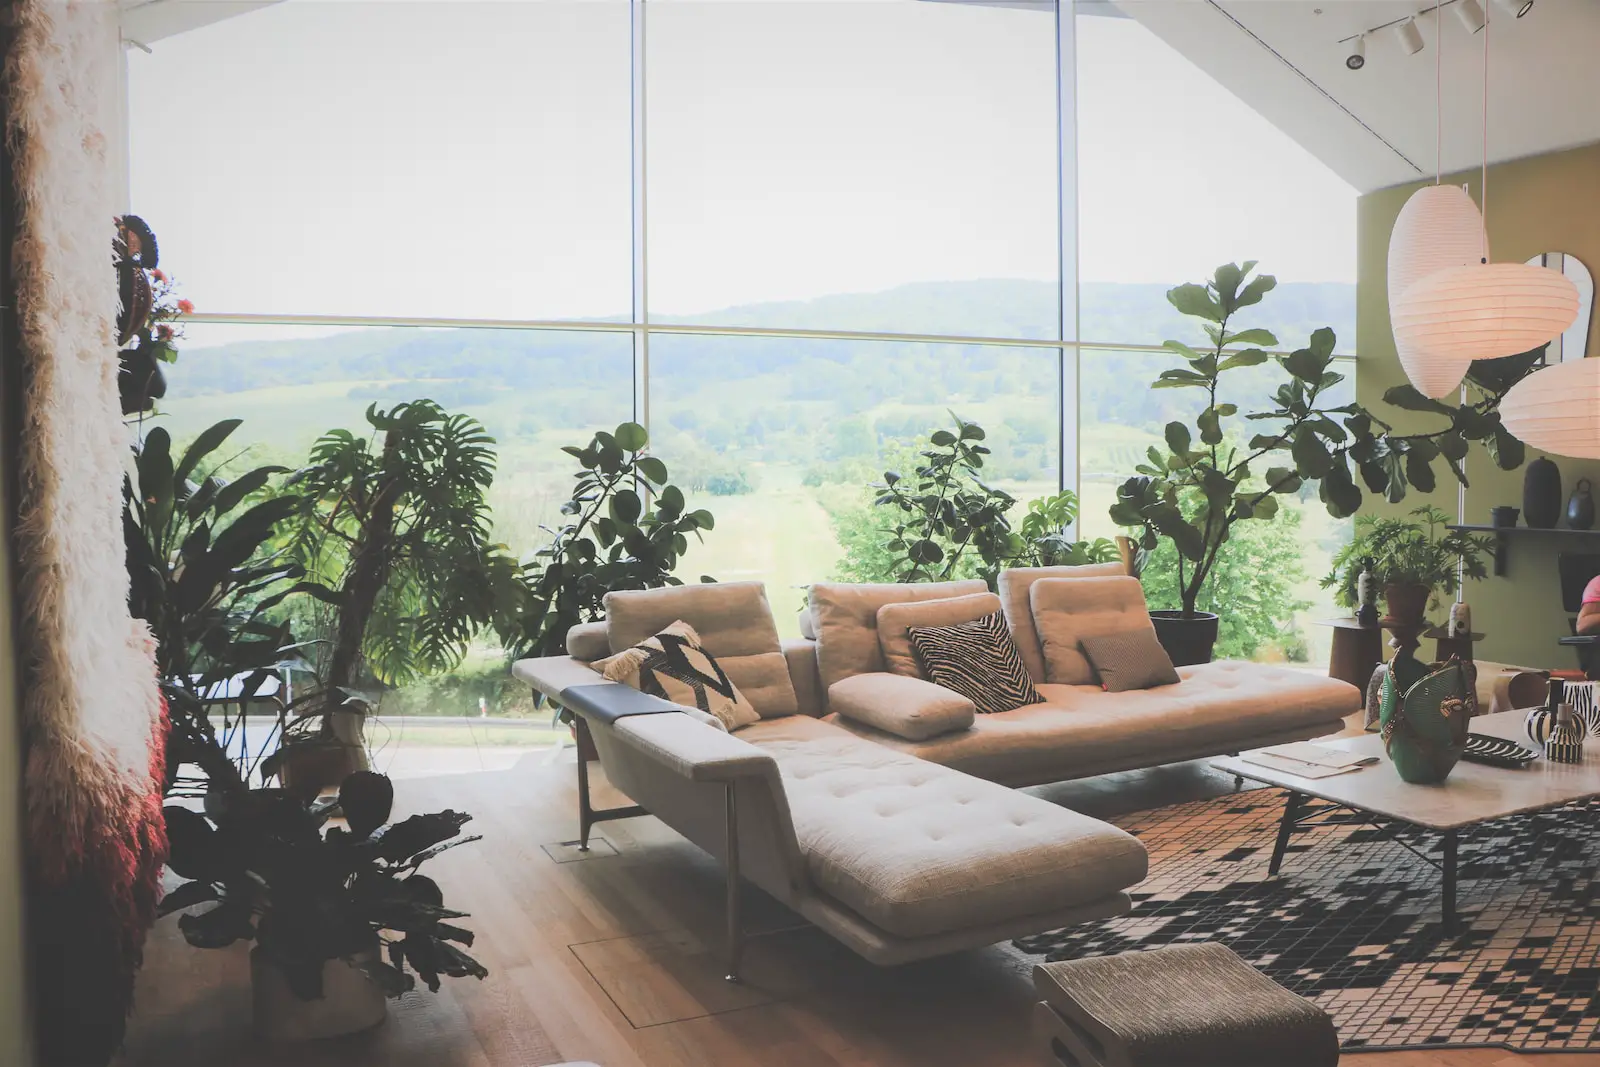 What Are the Best Plants for Indoor Air Quality and Safe Living?